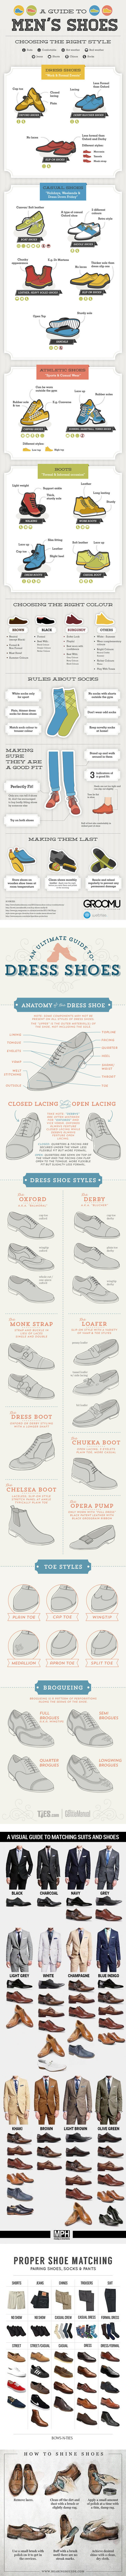 A guide to men's shoes